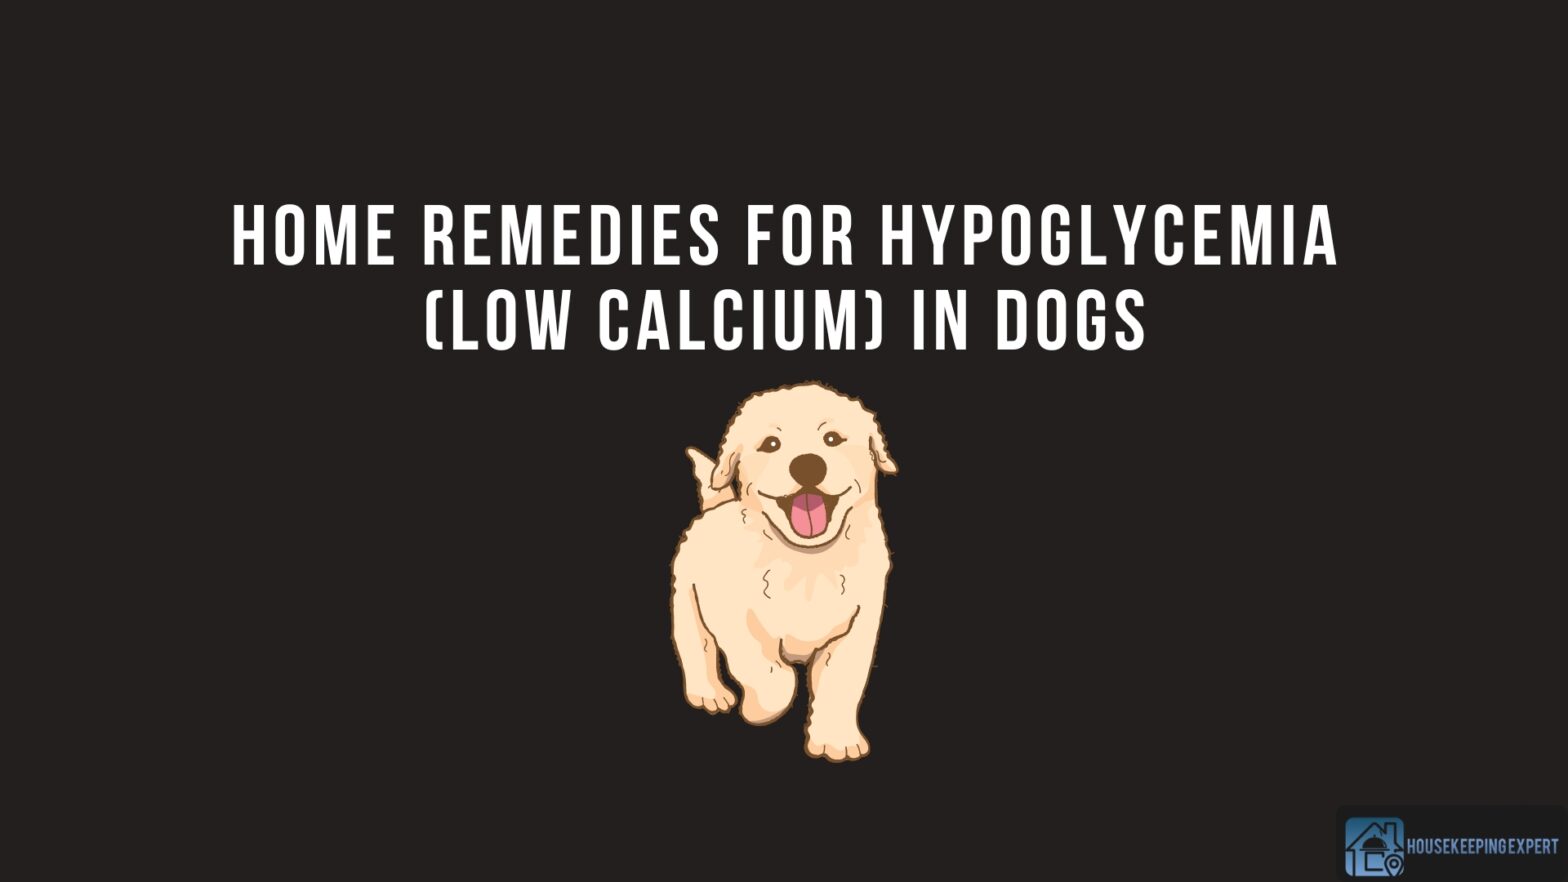 Home Remedies For Hypoglycemia (Low Calcium) In Dogs